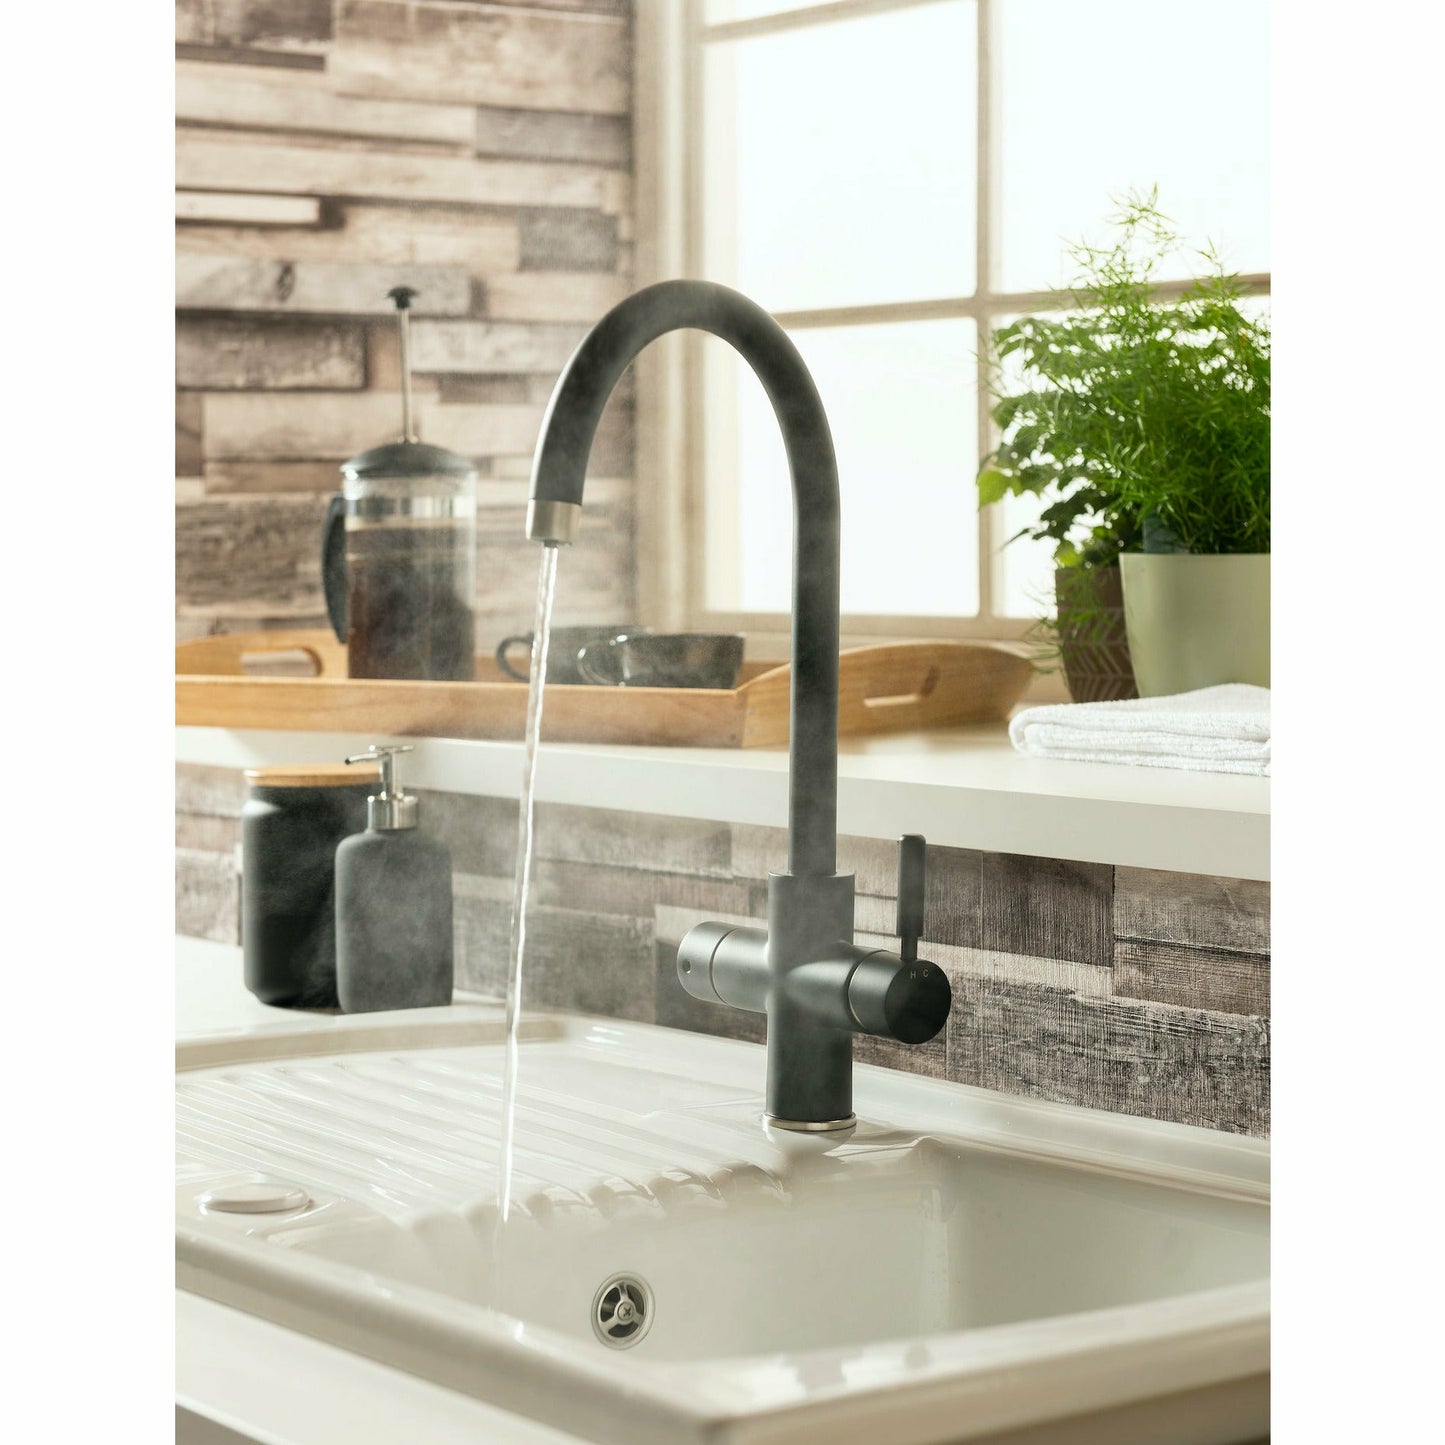 Waterlogic Vessi Instant Steaming Hot Water Tap for Home - The Tap Specialist